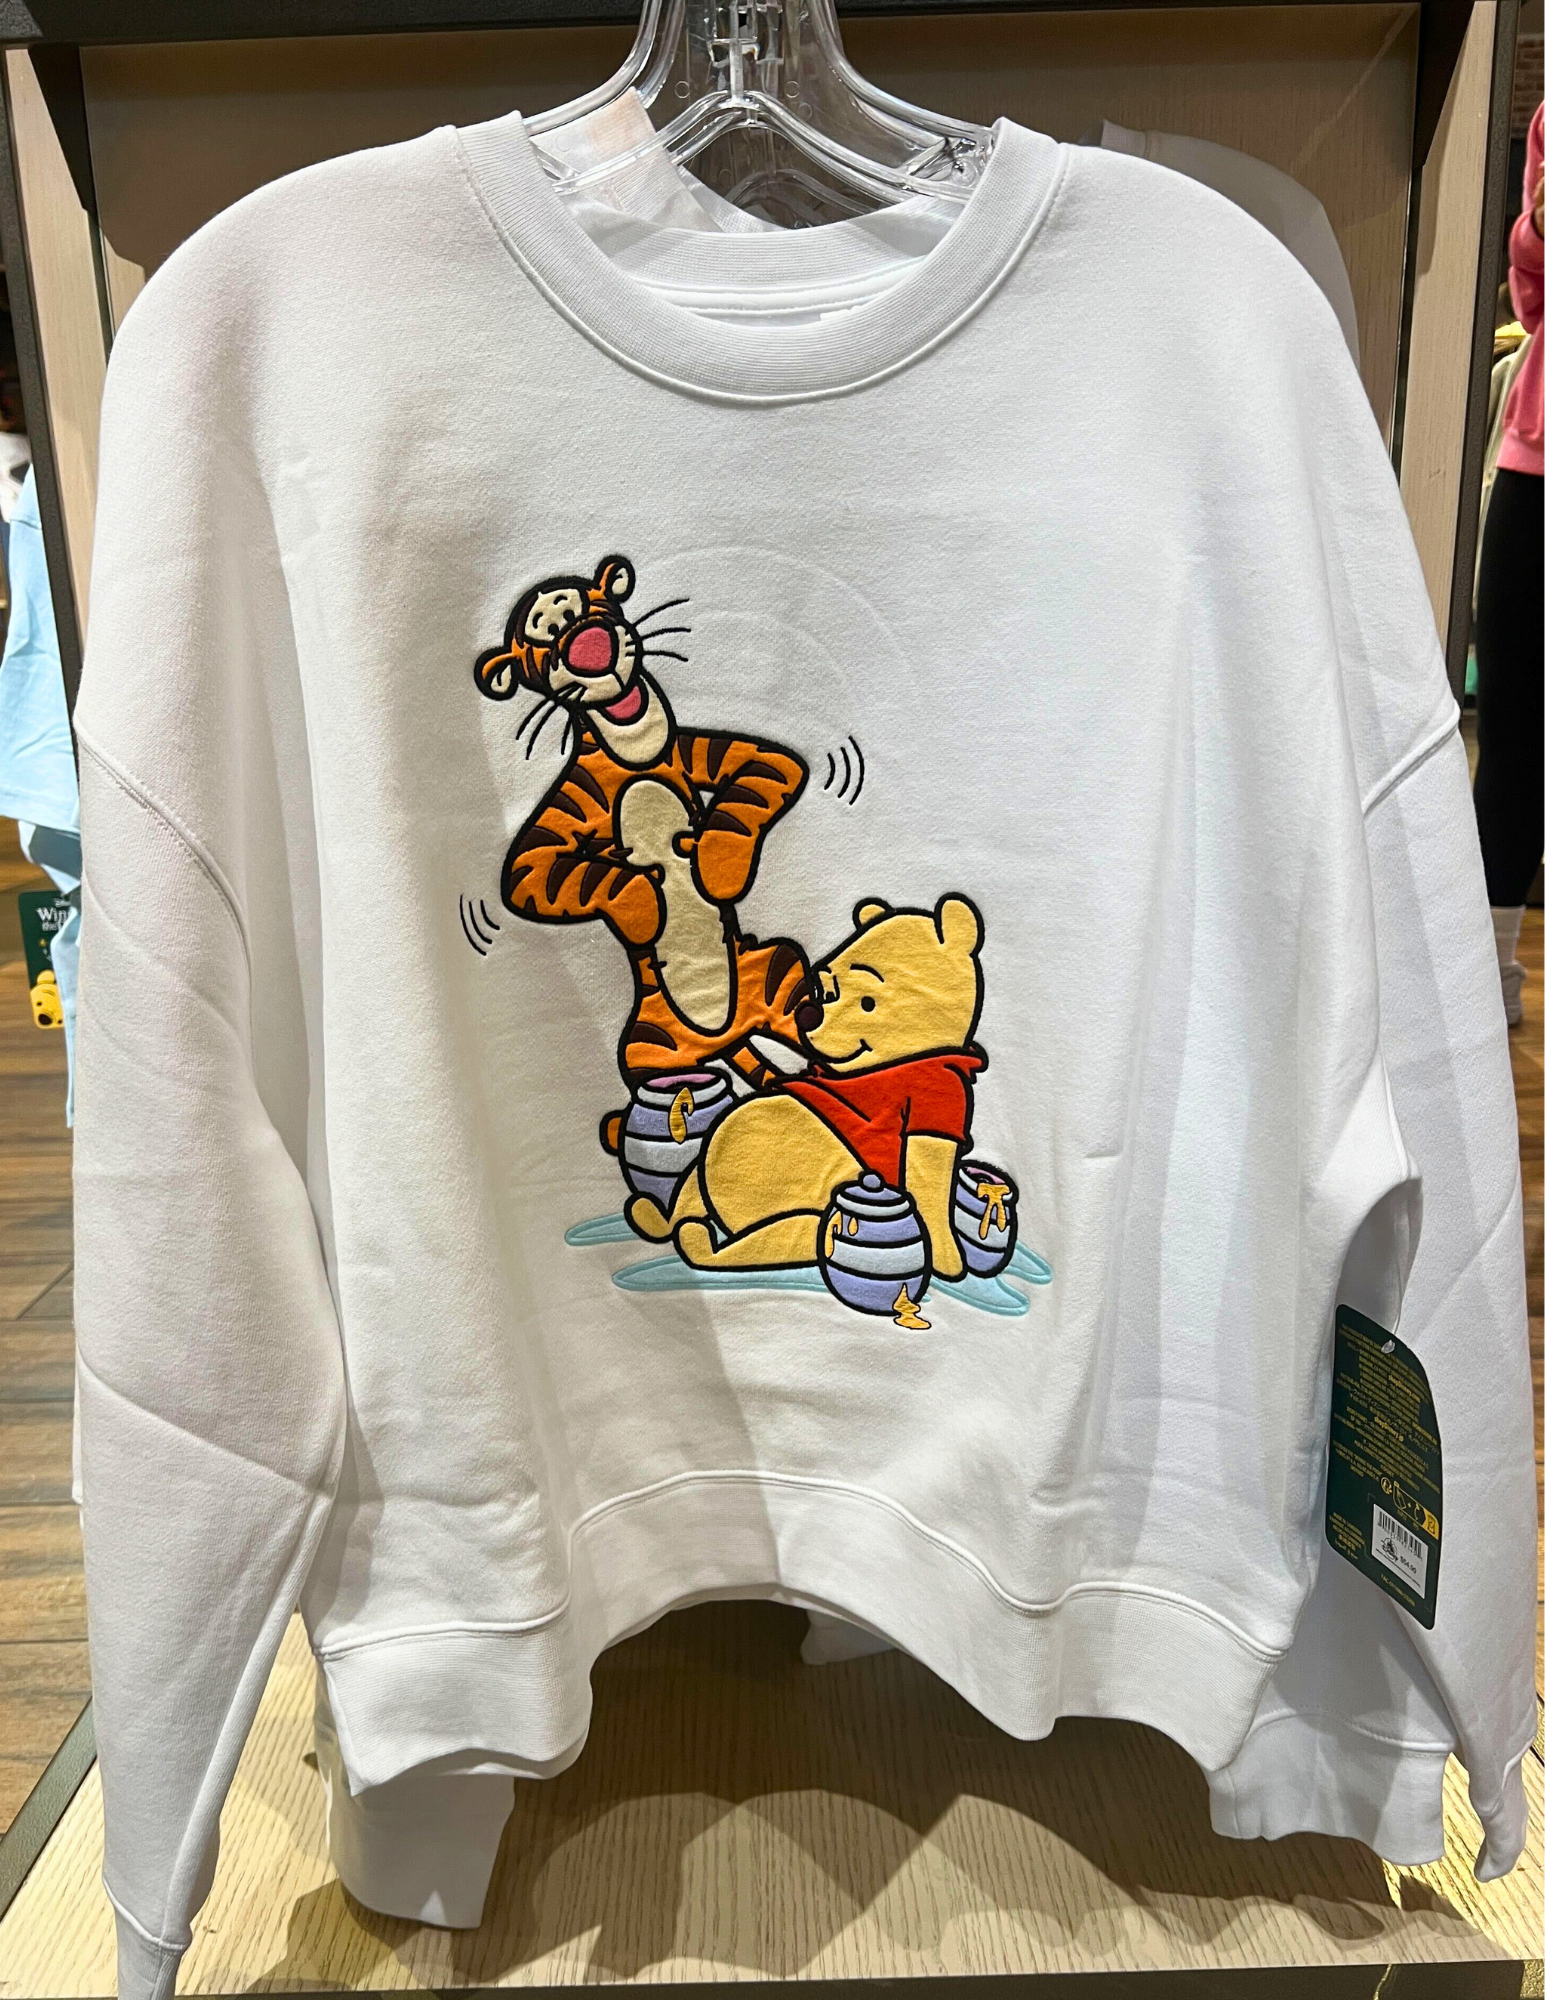 New 1990s-Inspired Winnie the Pooh Sweaters and Crocs Arrive at Disneyland  Resort - WDW News Today